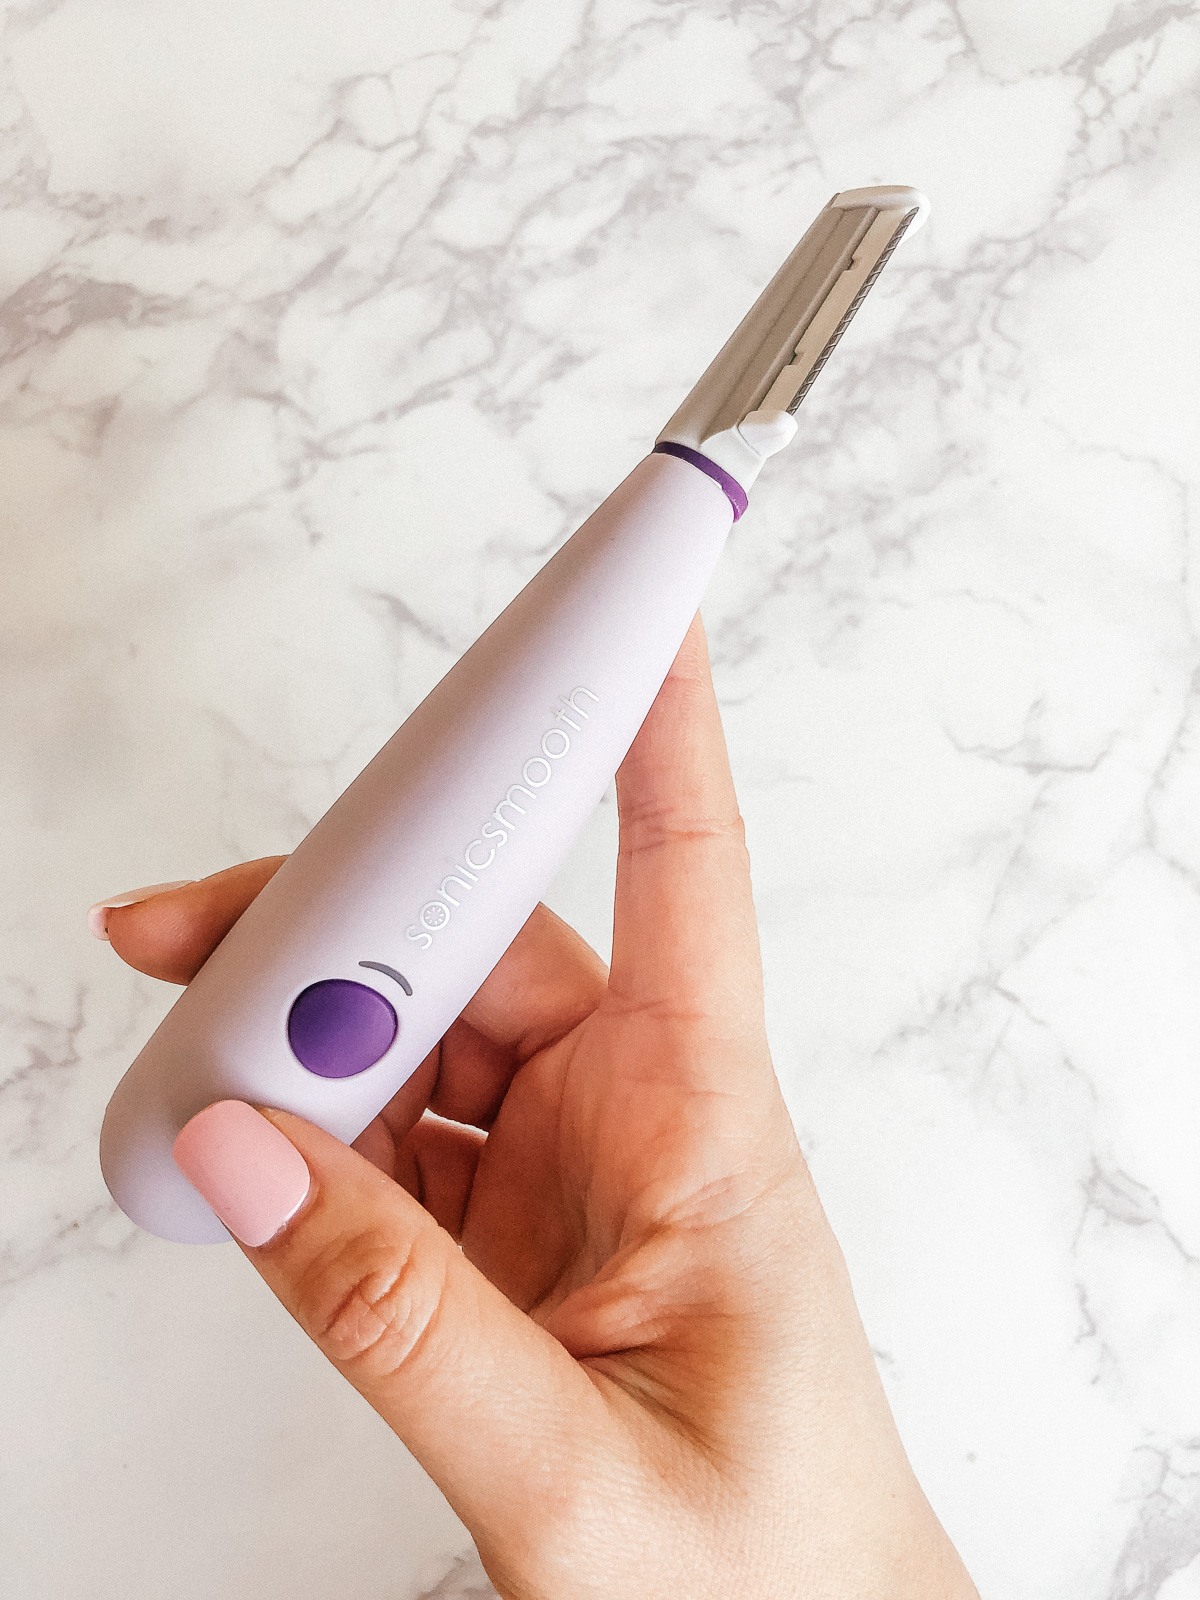 How to dermaplane at home, by beauty blogger What The Fab